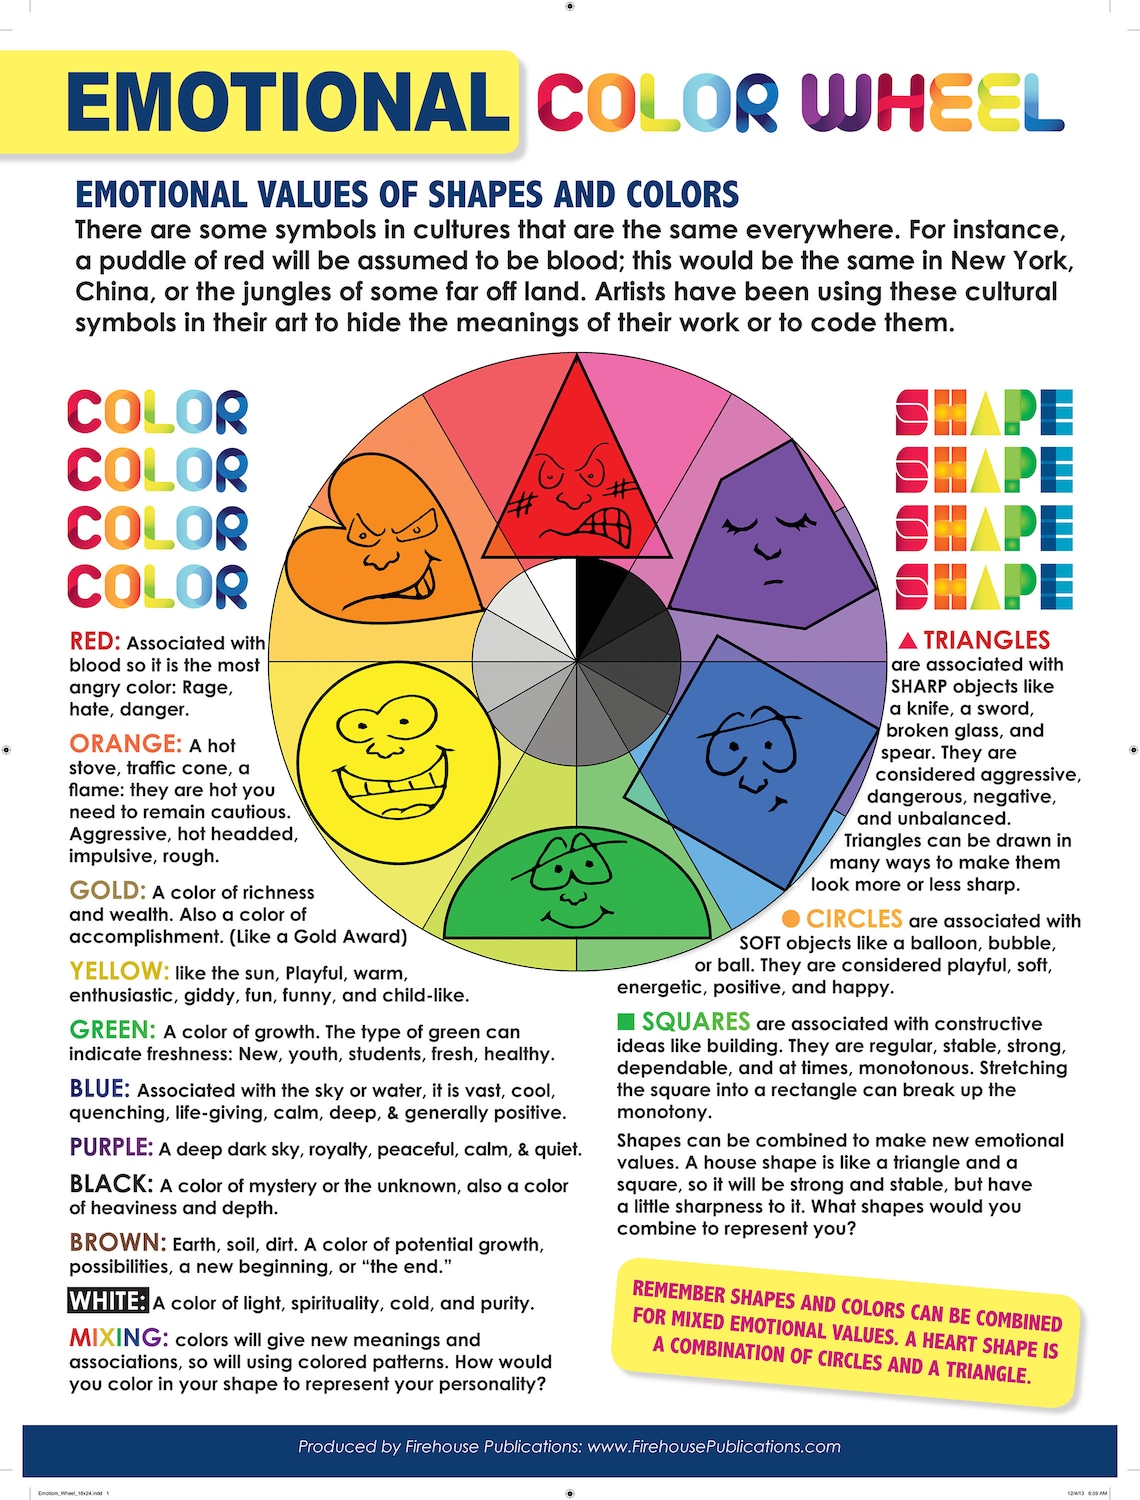 the-emotional-color-wheel-poster-etsy